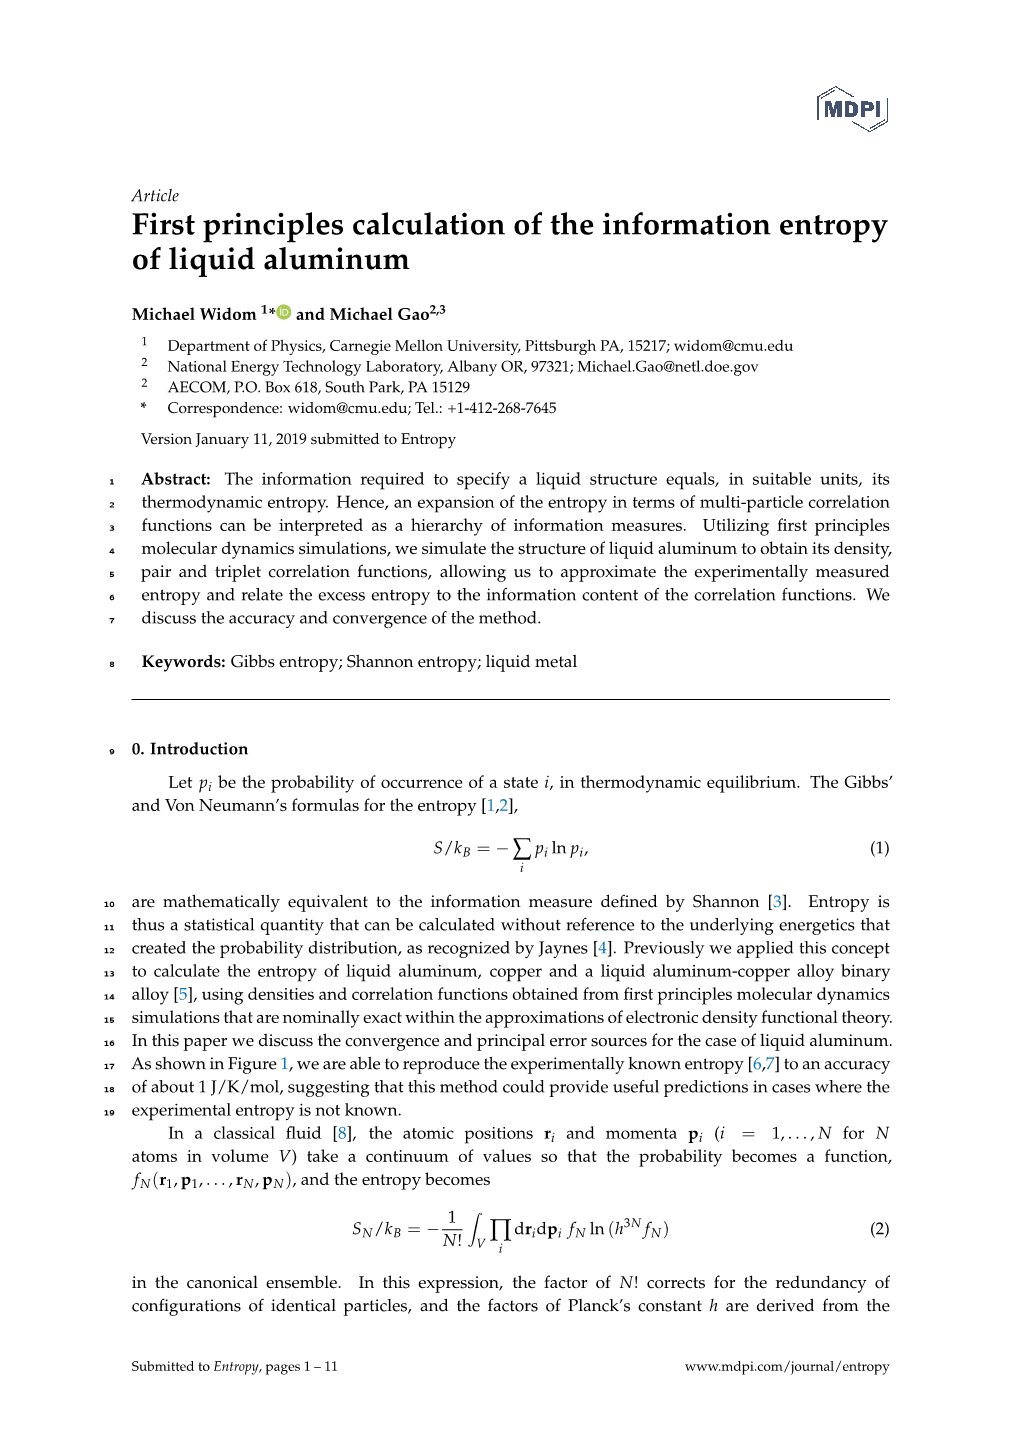 First Principles Calculation of the Information Entropy of Liquid Aluminum